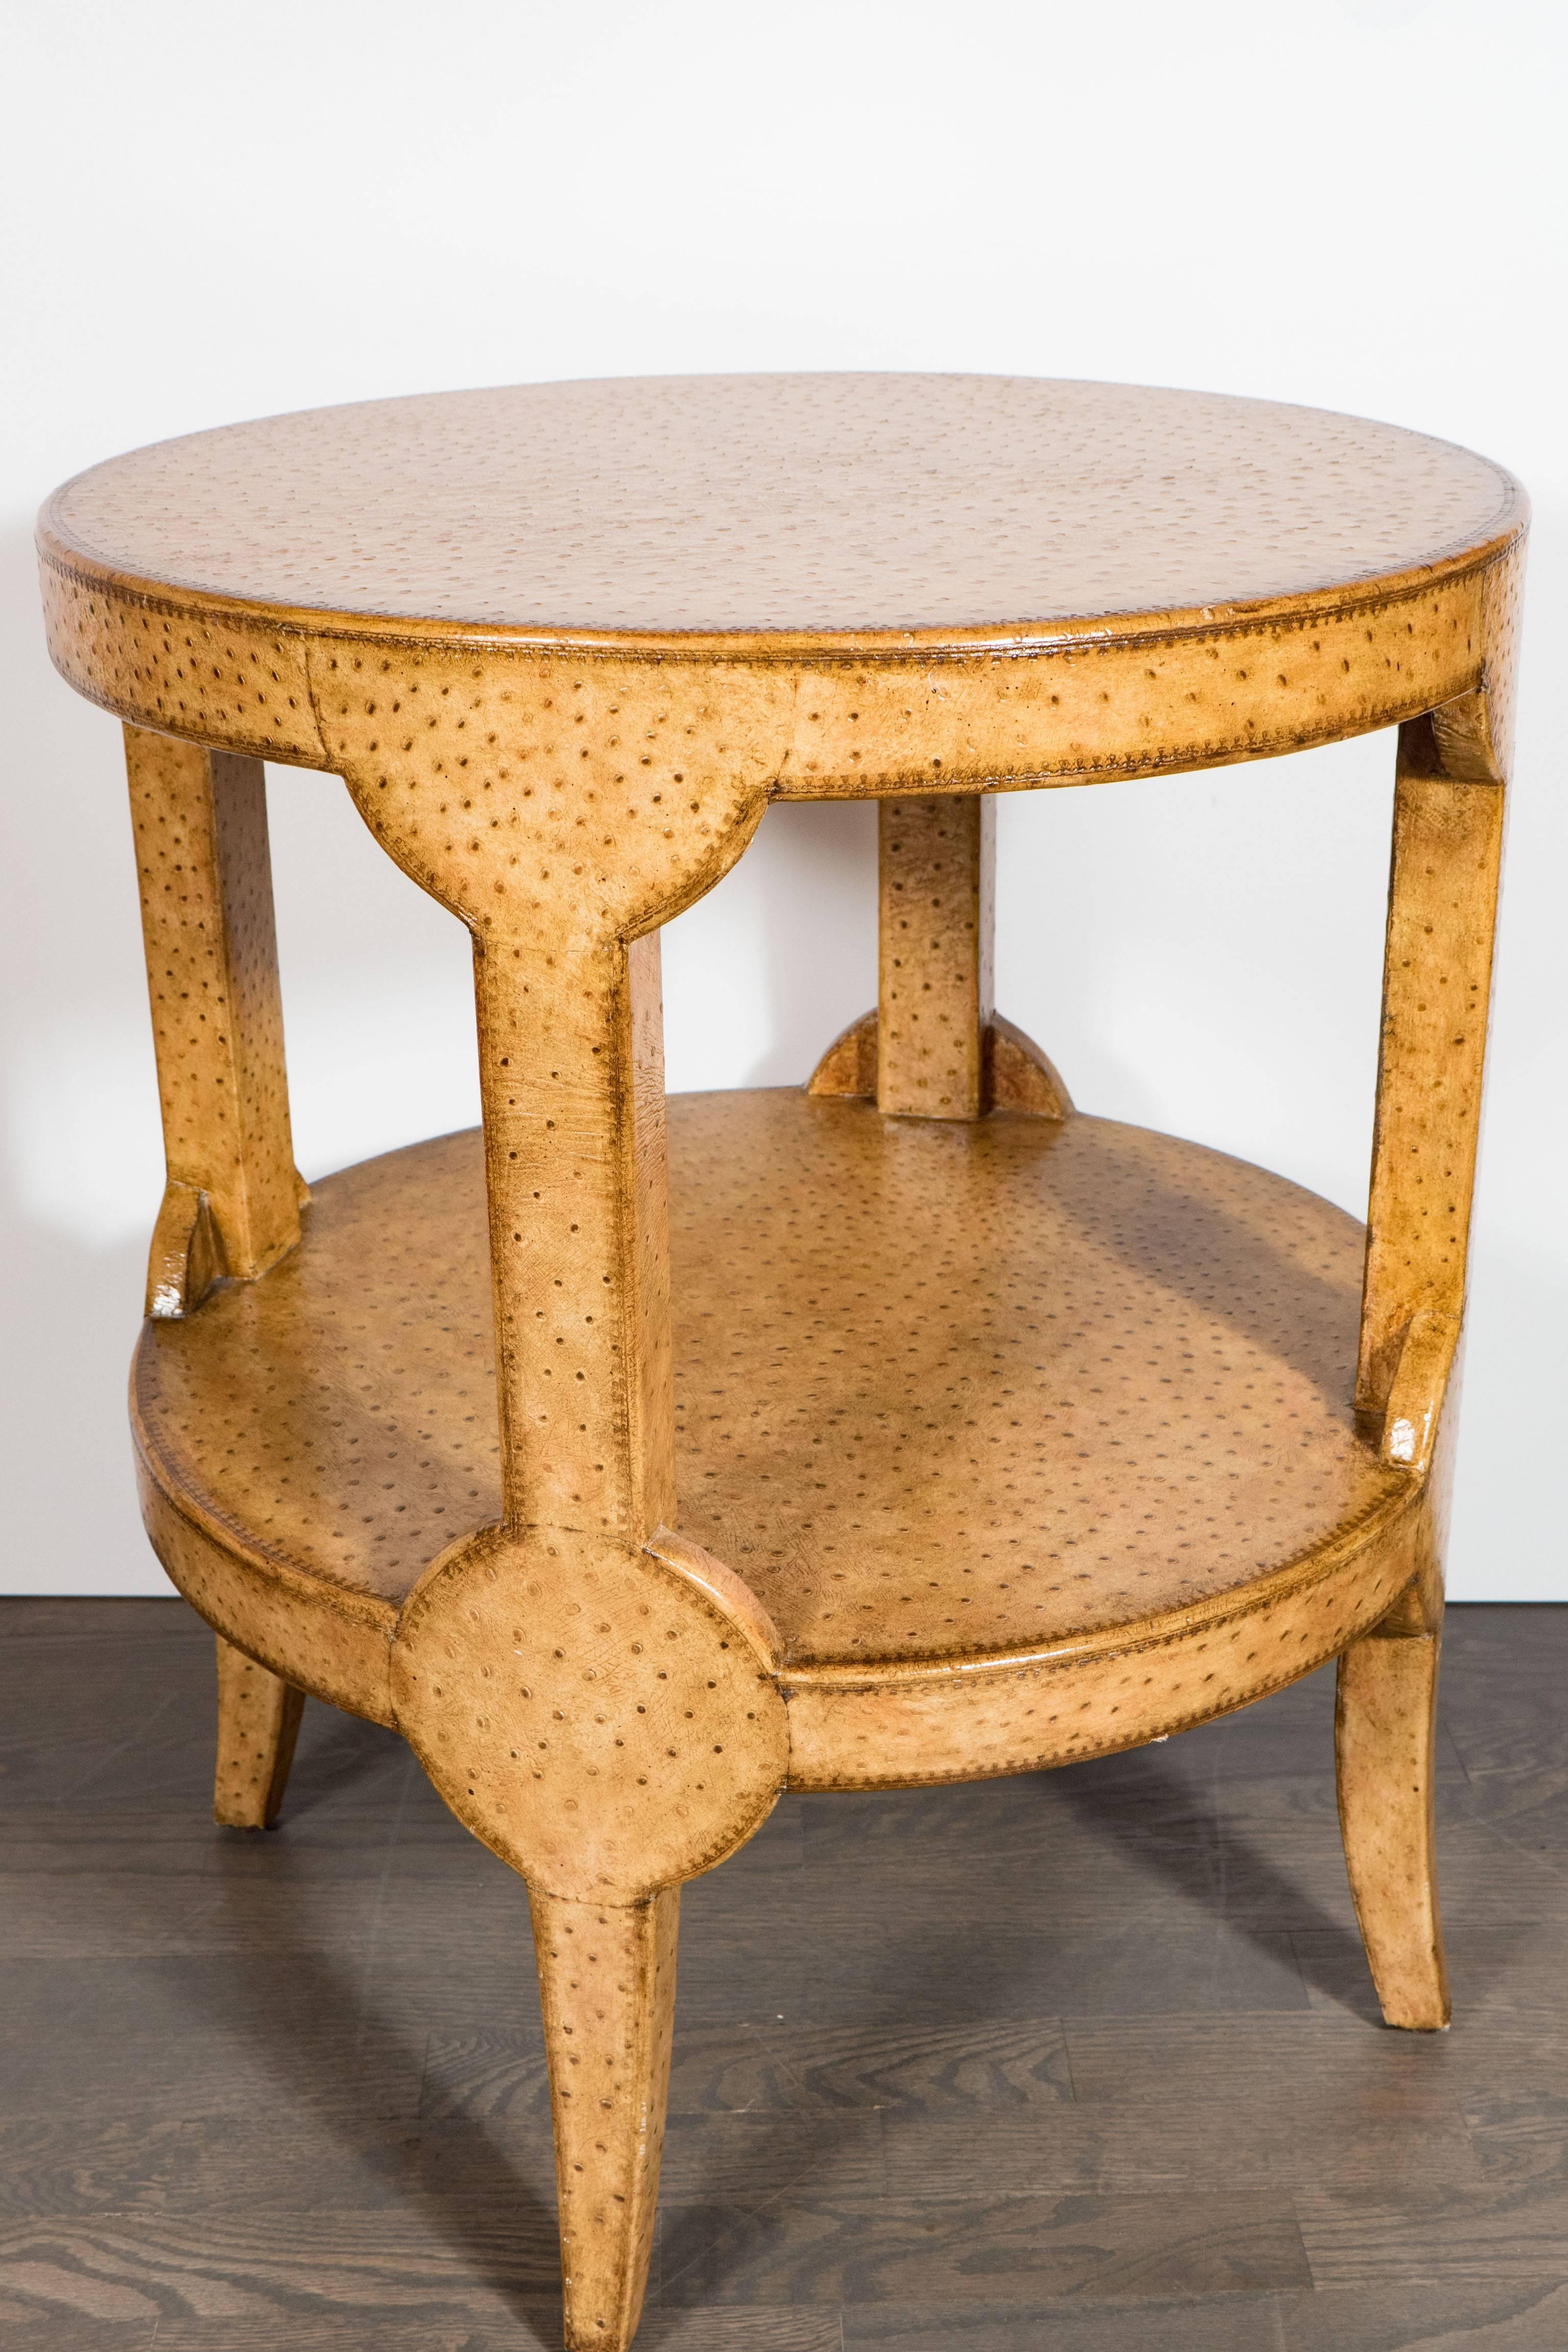 American Mid-Century Modernist Two-Tier Ostrich Skin Side Gueridon Table